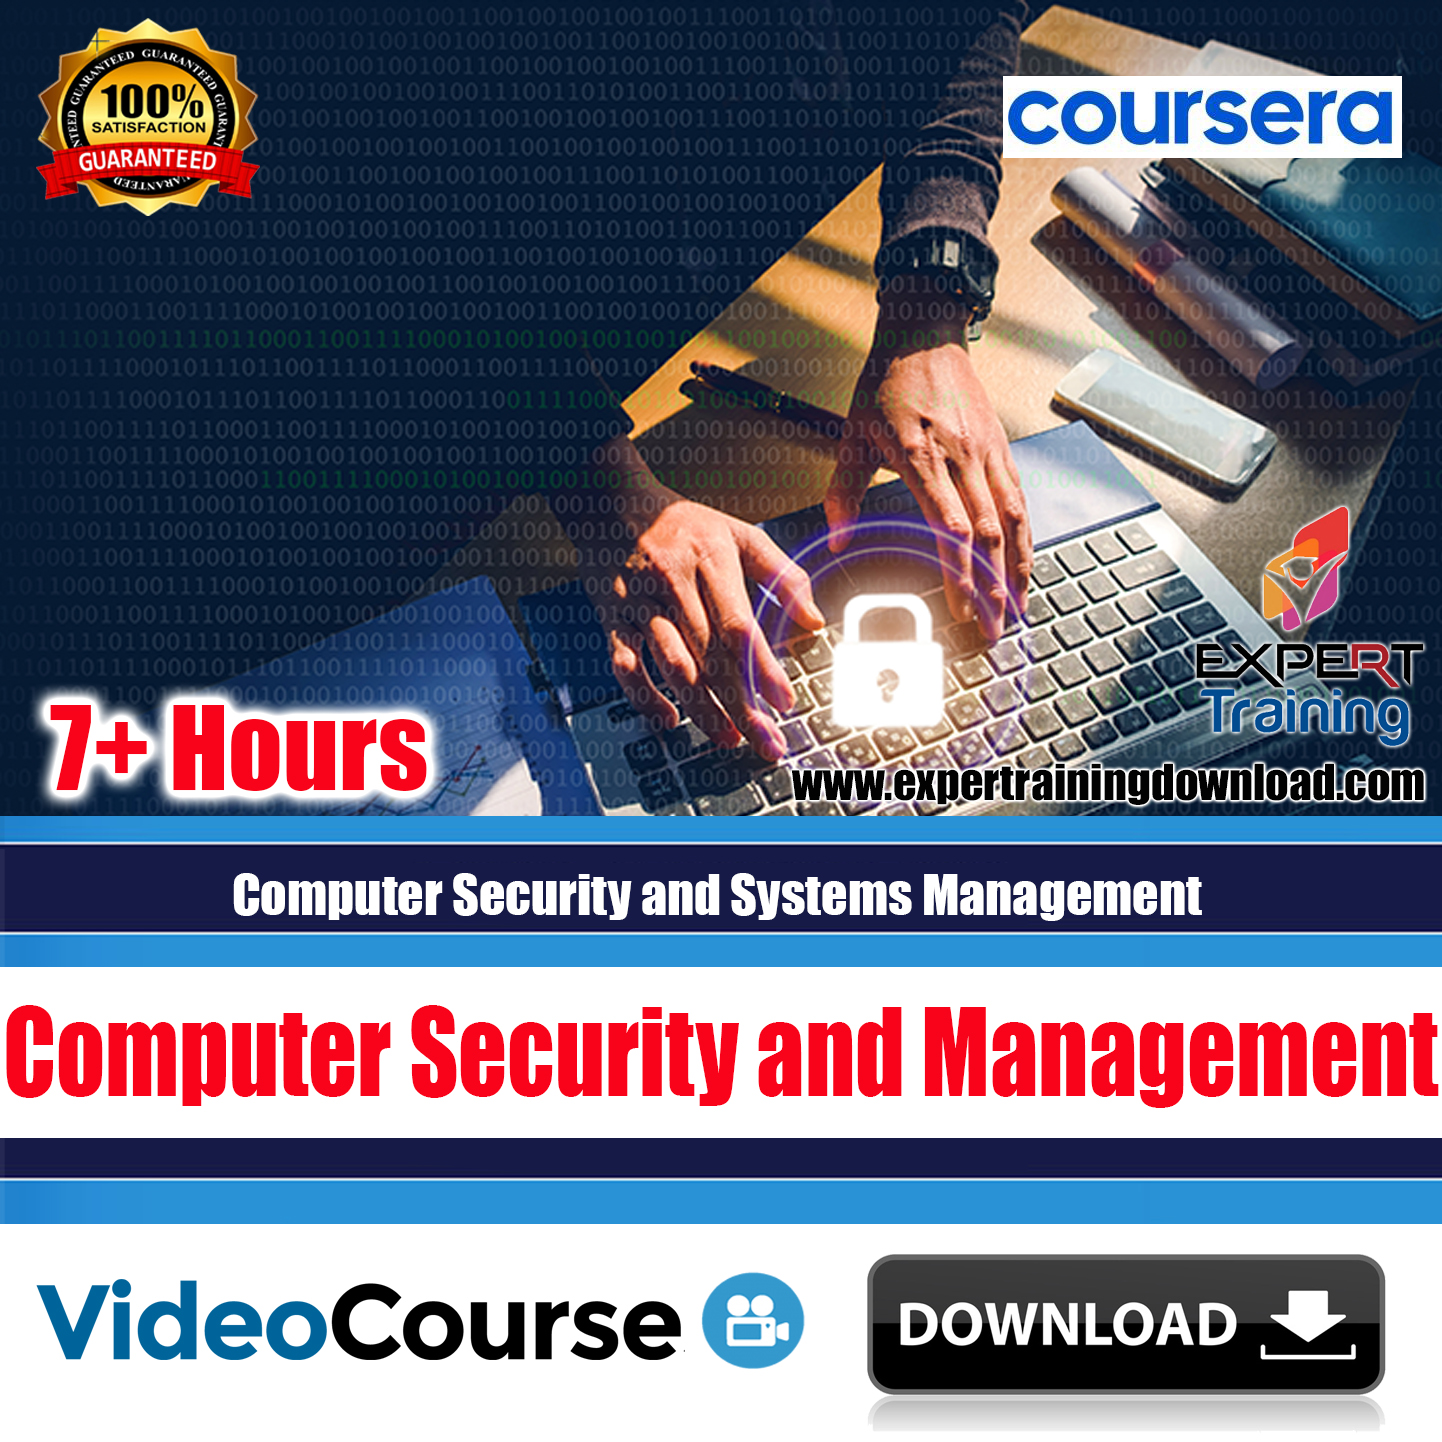 Computer Security and Systems Management